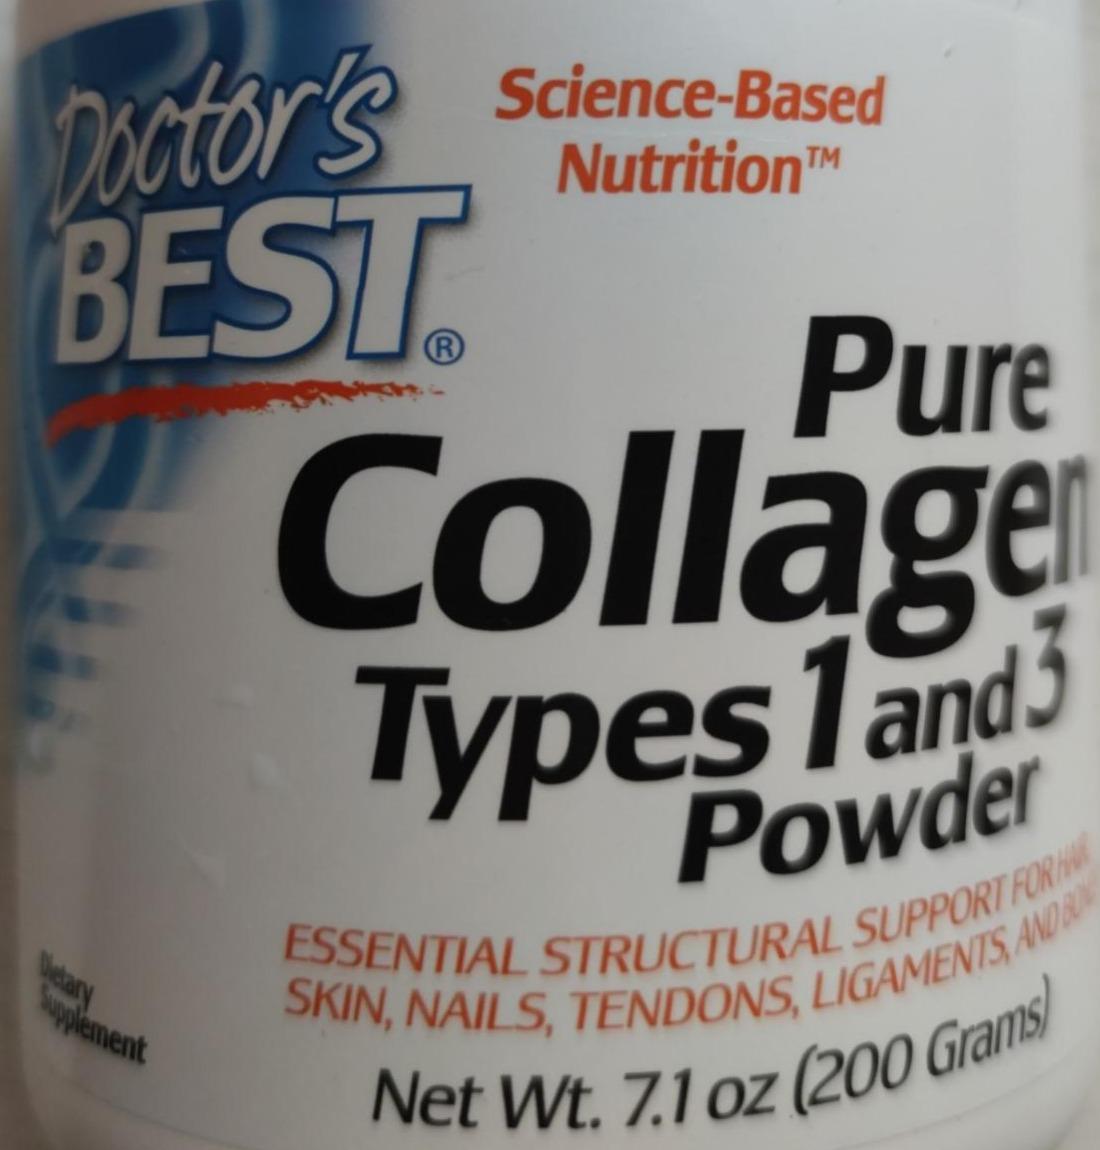 Фото - Pure Collagen types 1 and 3 Powder Doctor's Best